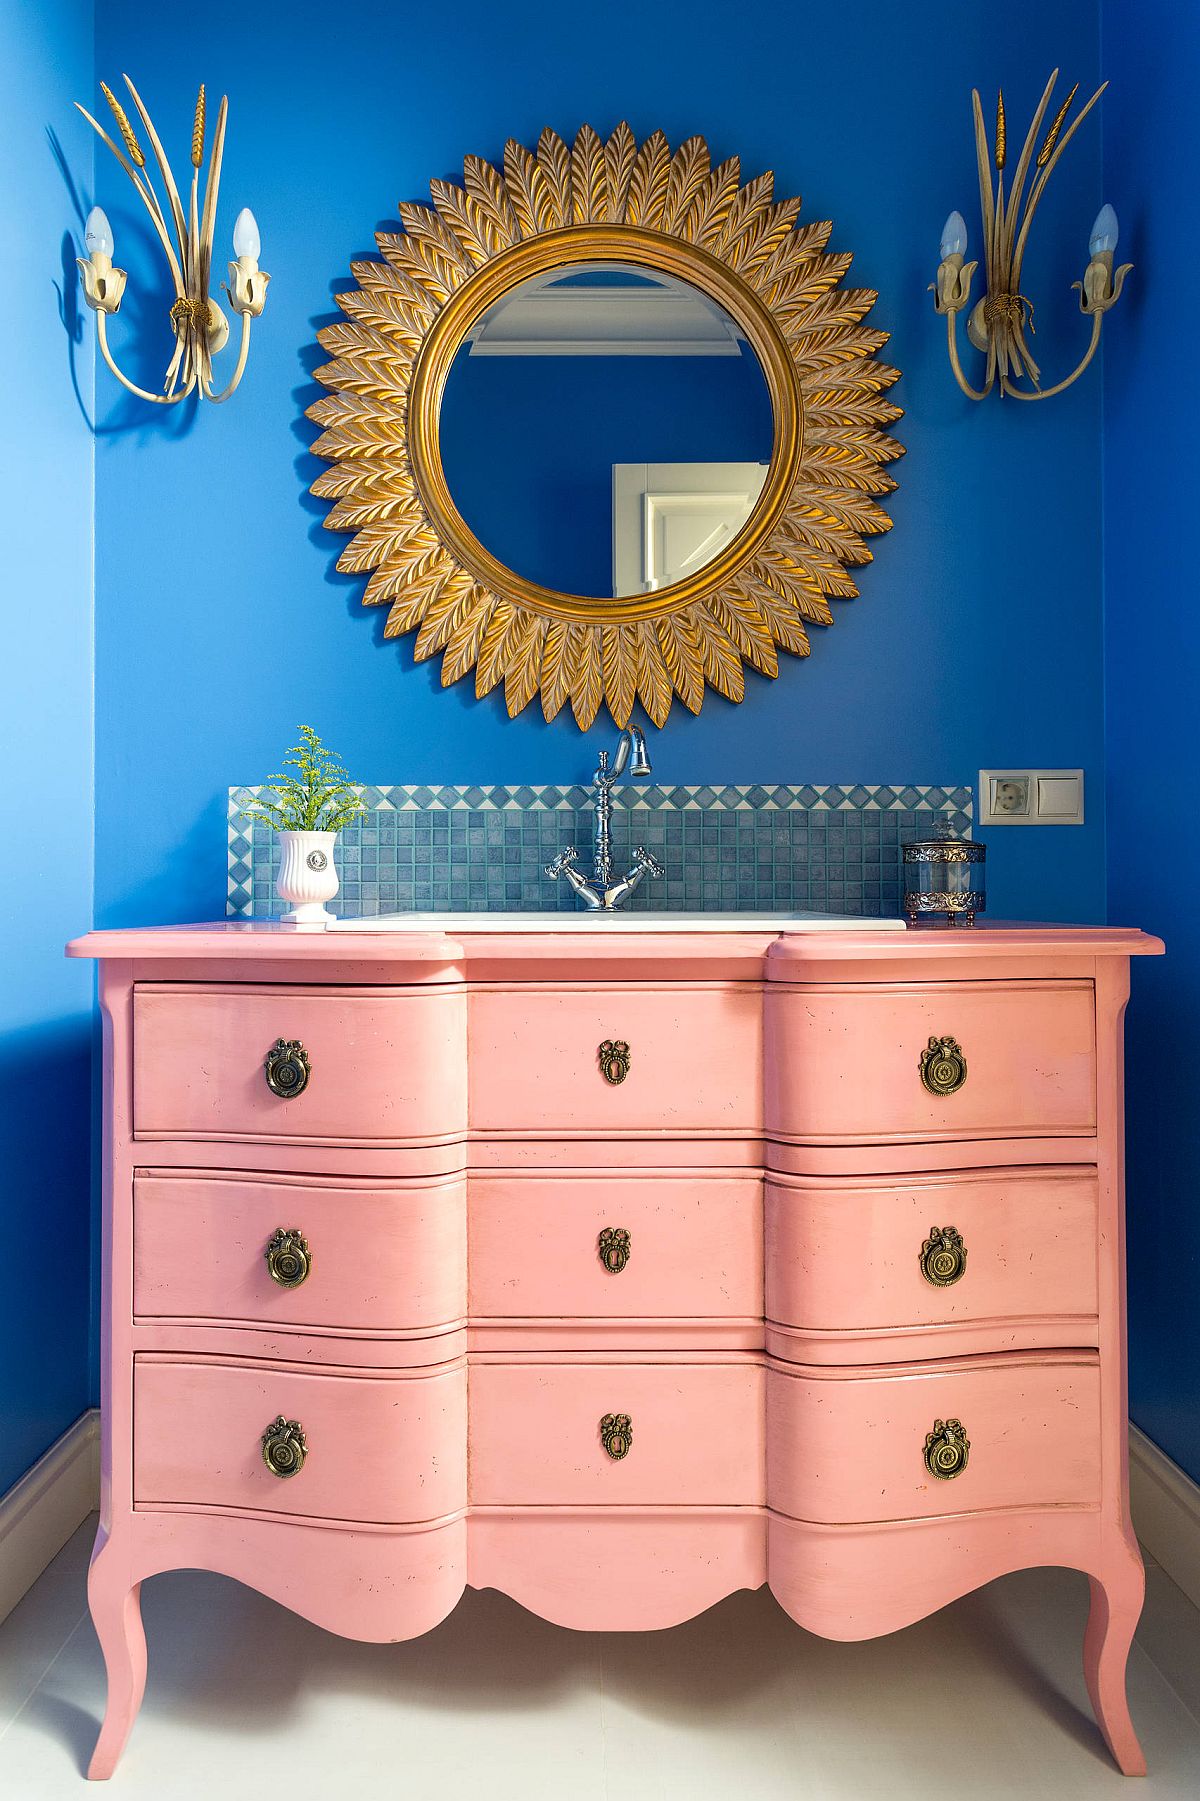 Awesome bathroom in blue with a light pink vanity and a dazzling gold mirror